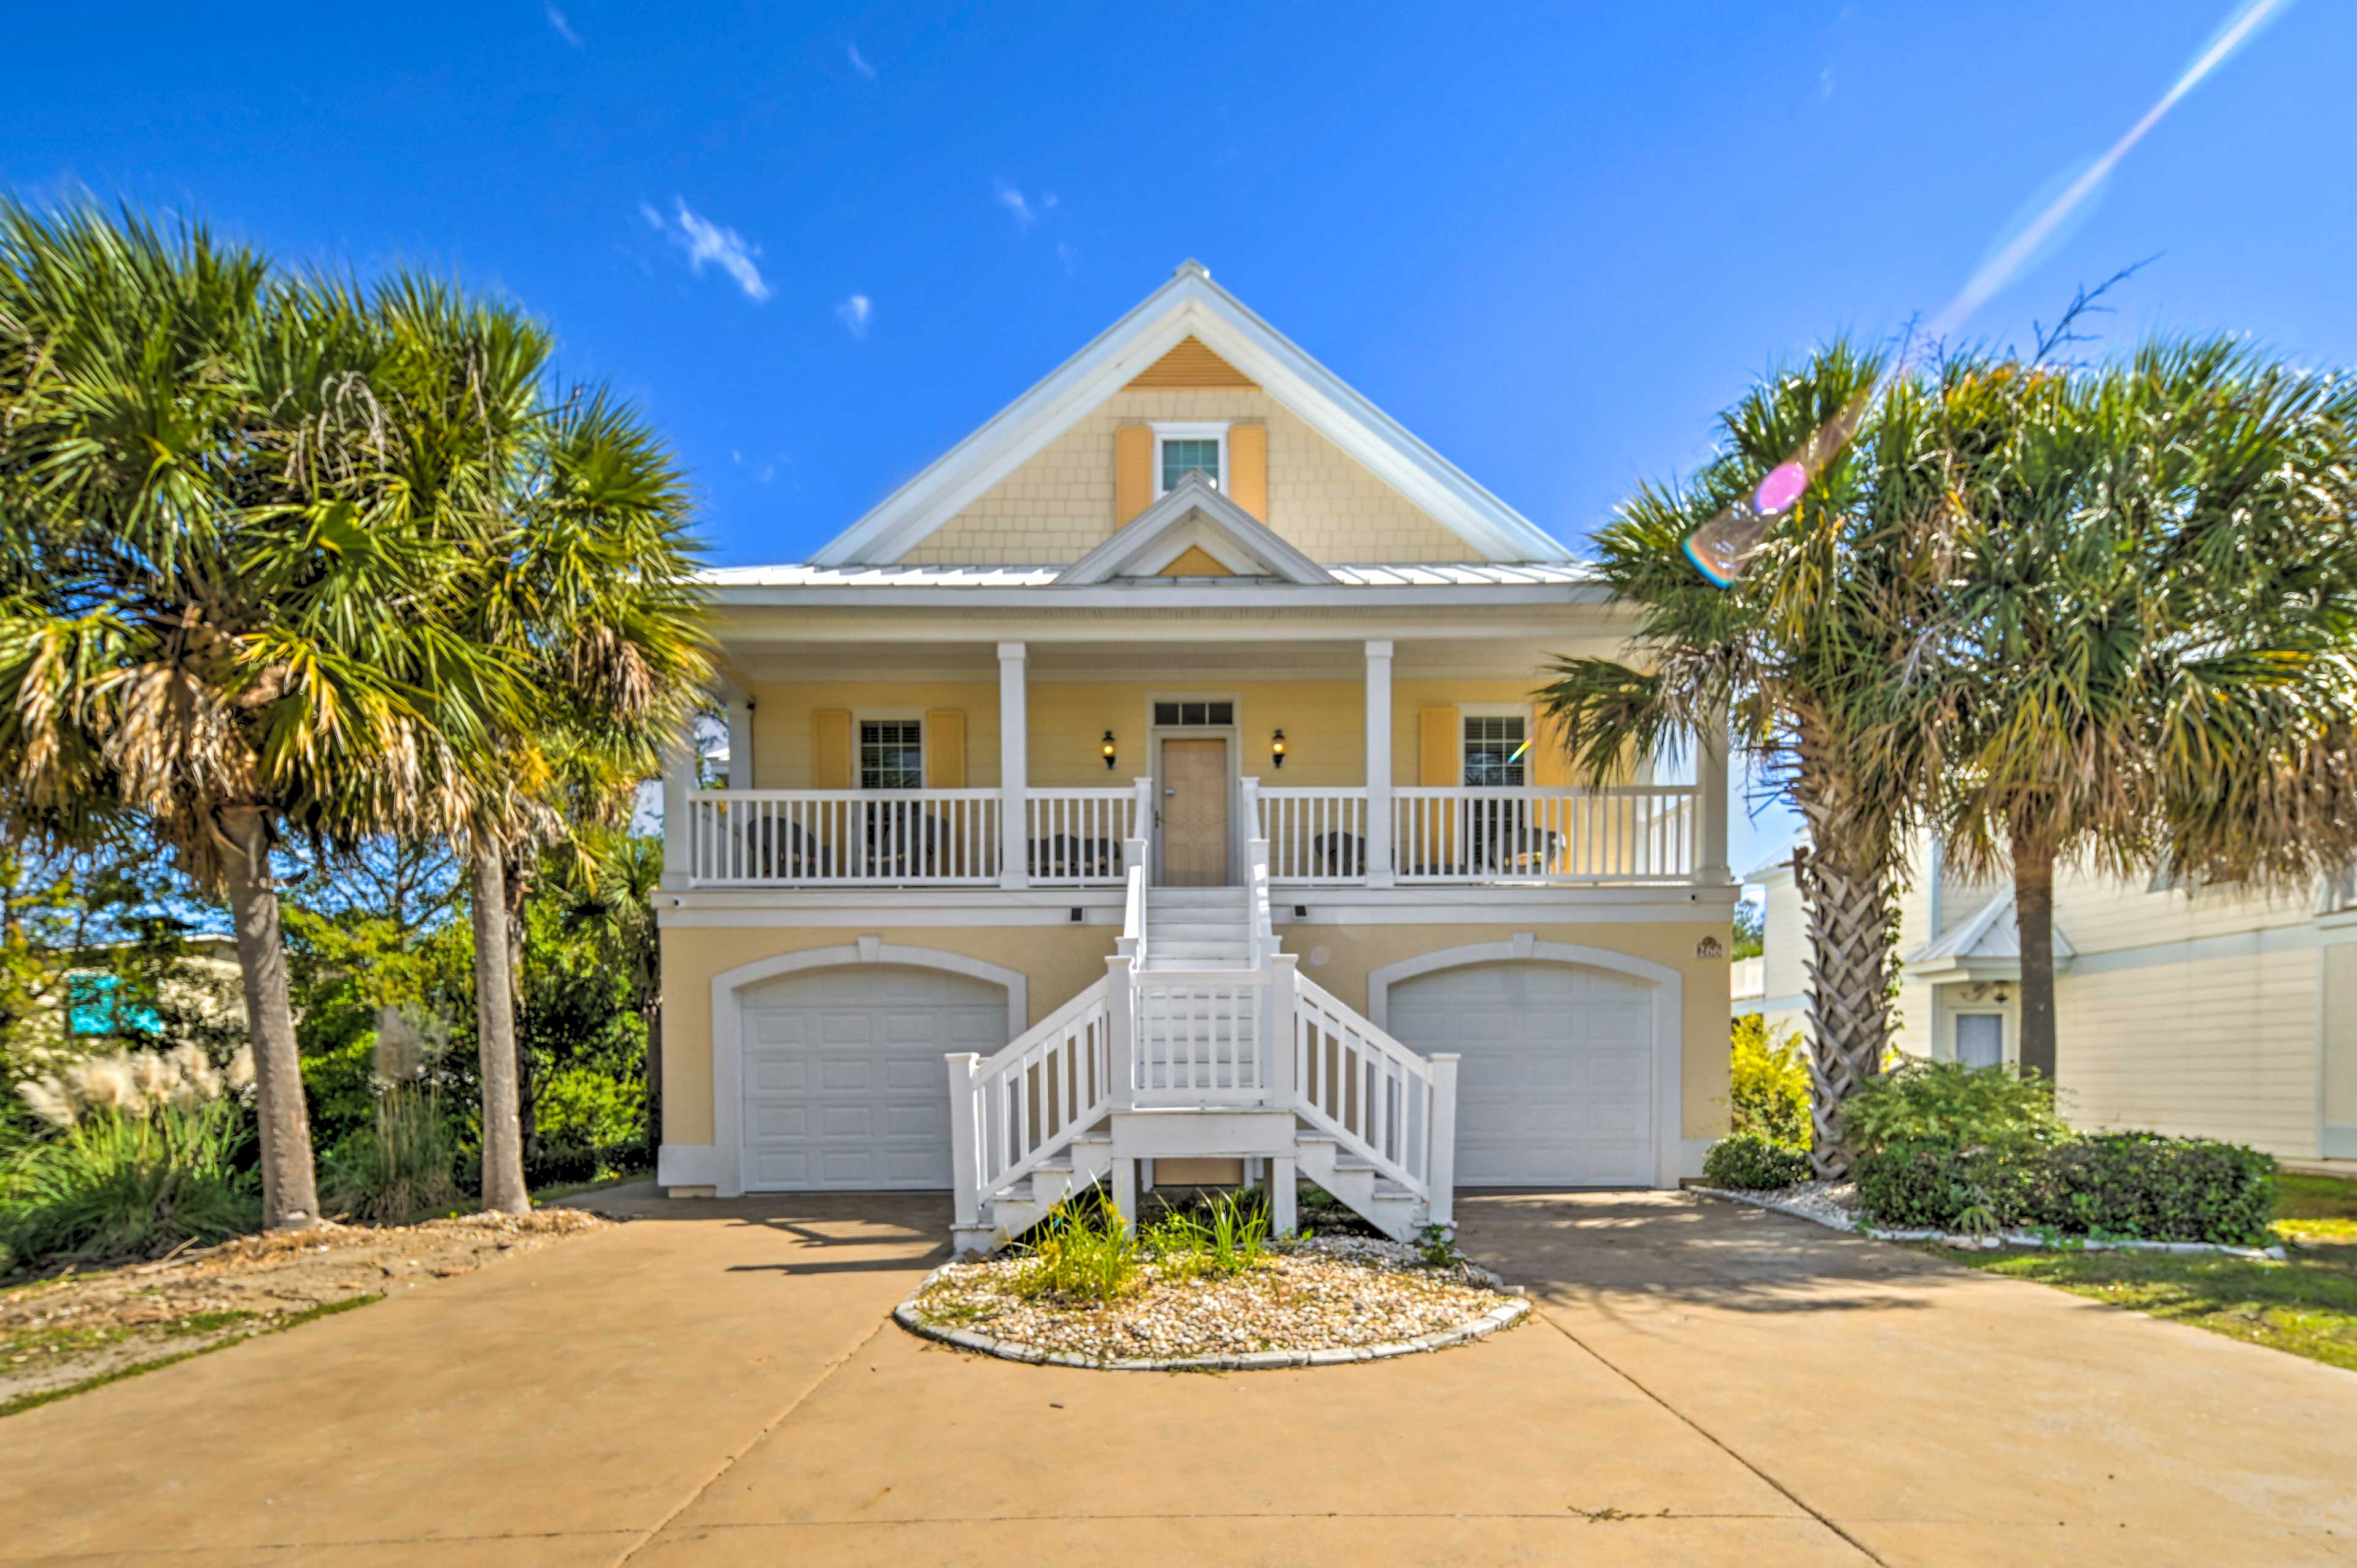 Murells Inlet Vacation Rental | 4BR | 5BA | Steps Required For Access